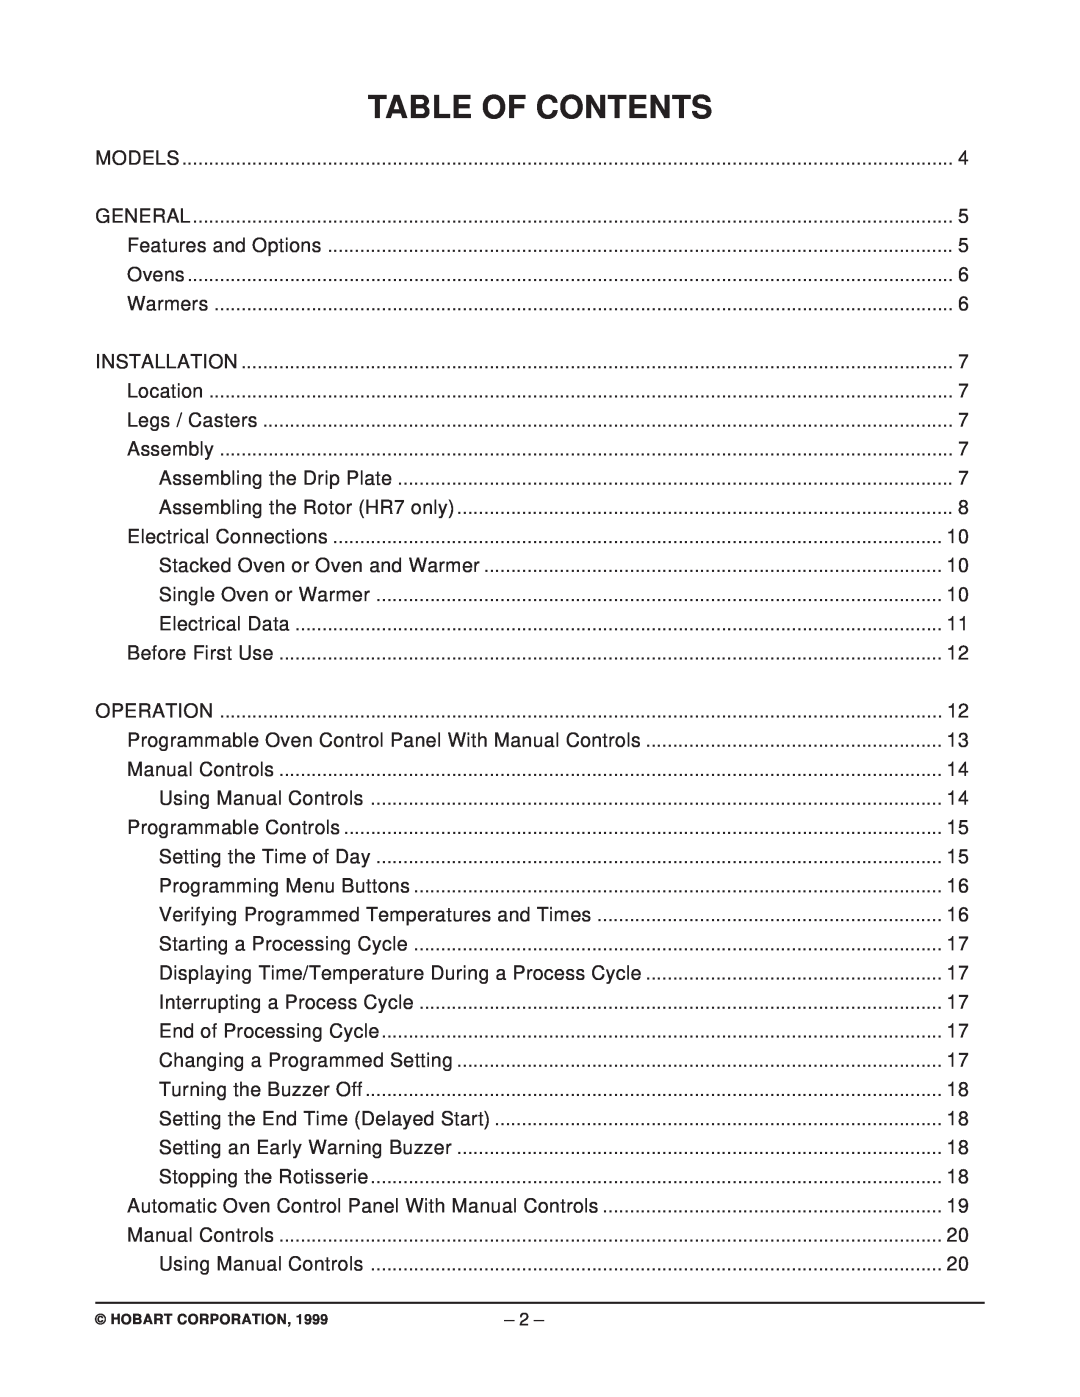 Hobart HR5 manual Table Of Contents, Hobart Corporation 